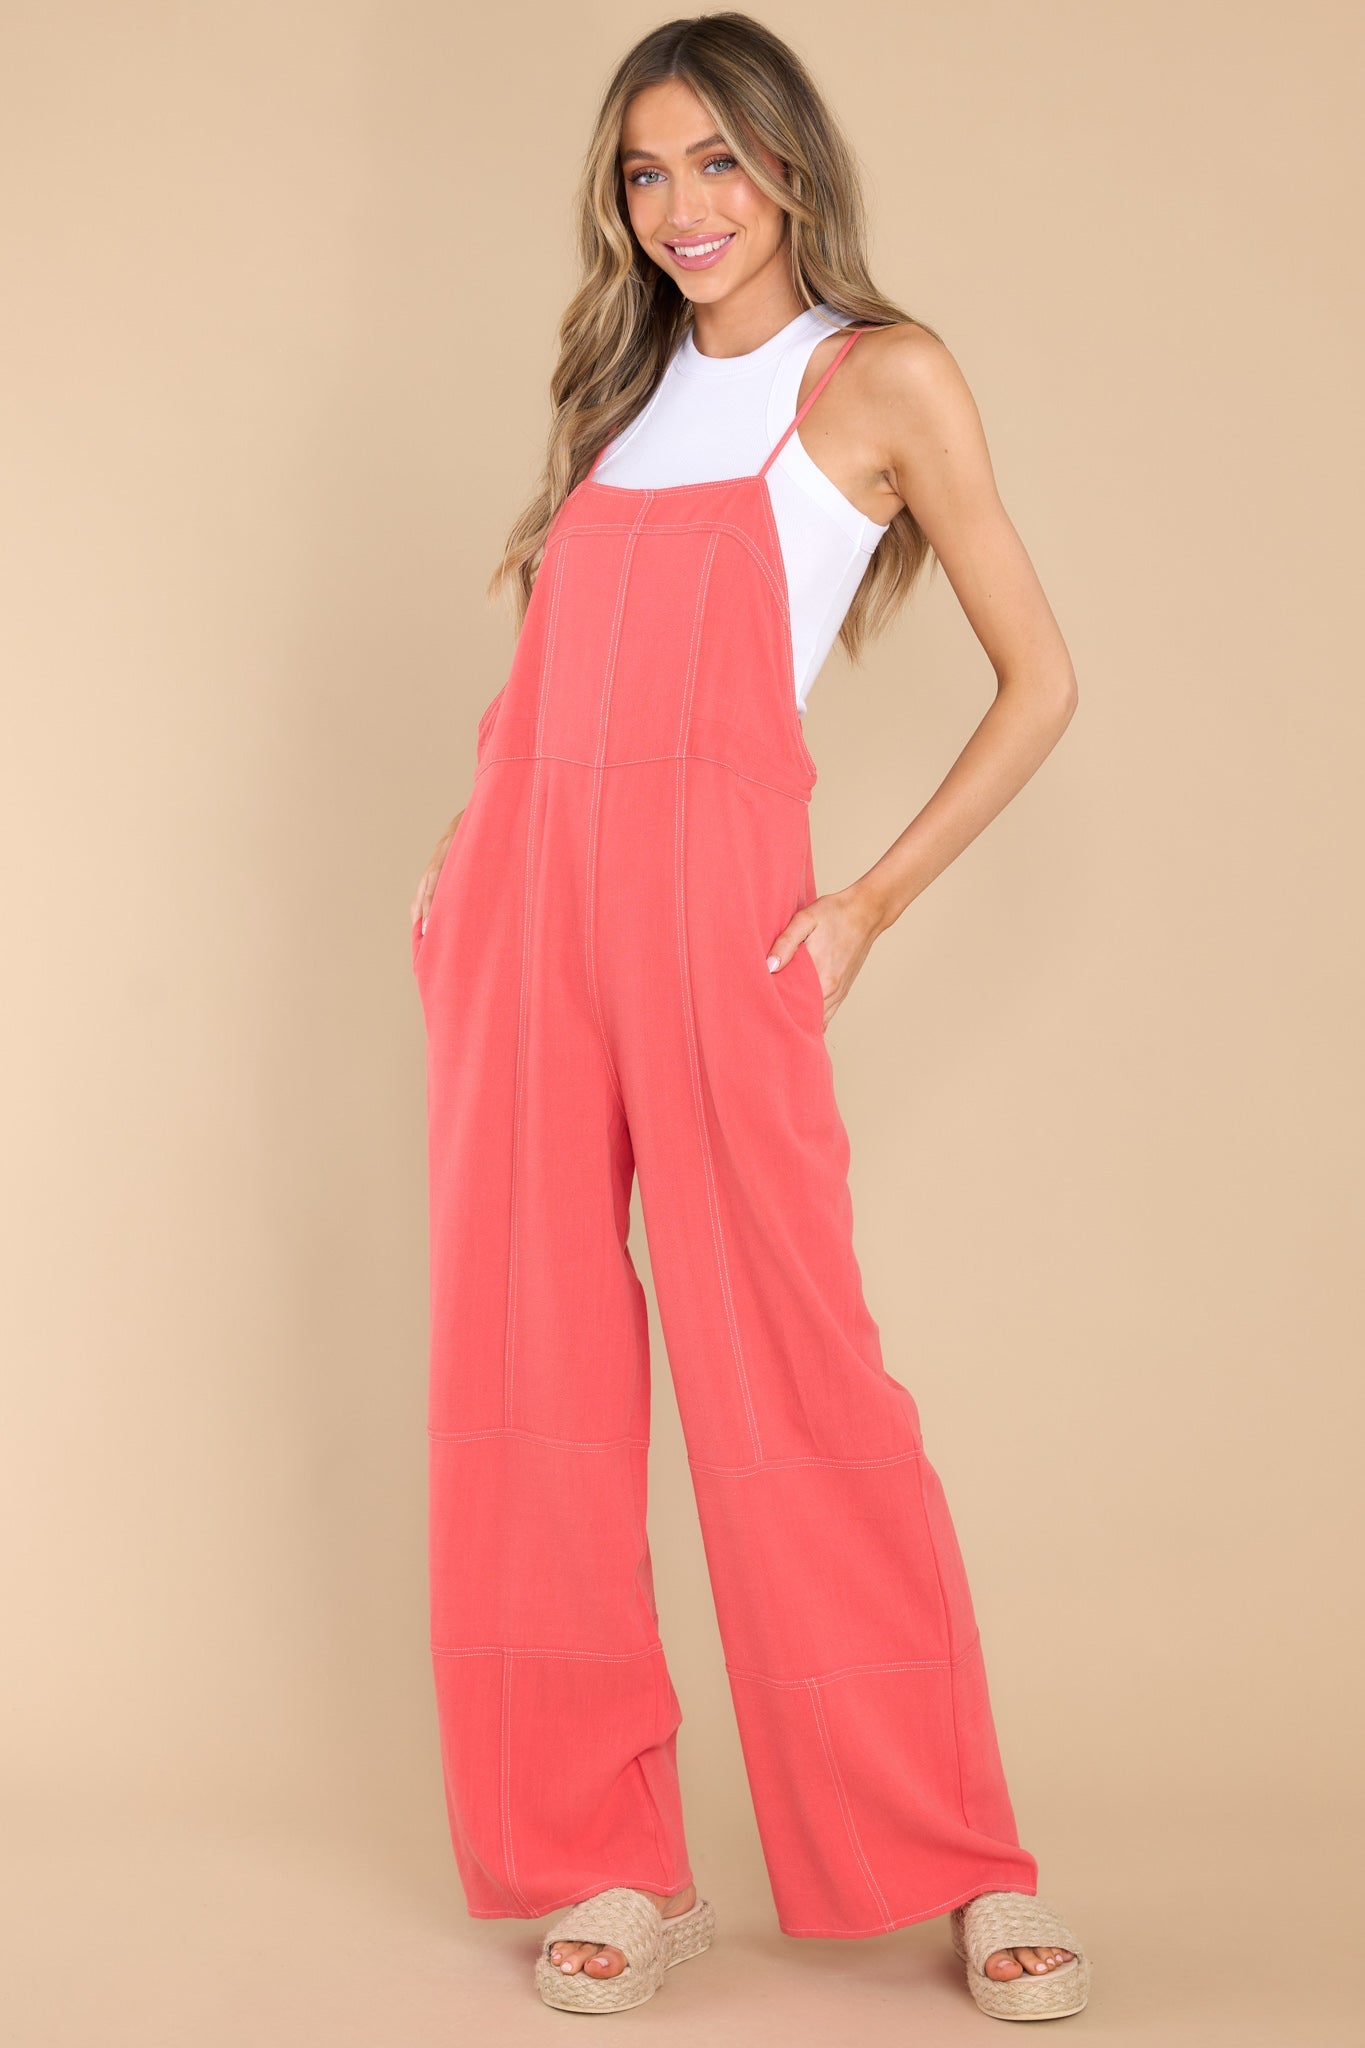 In My Own Rhythm Coral Overalls - Red Dress